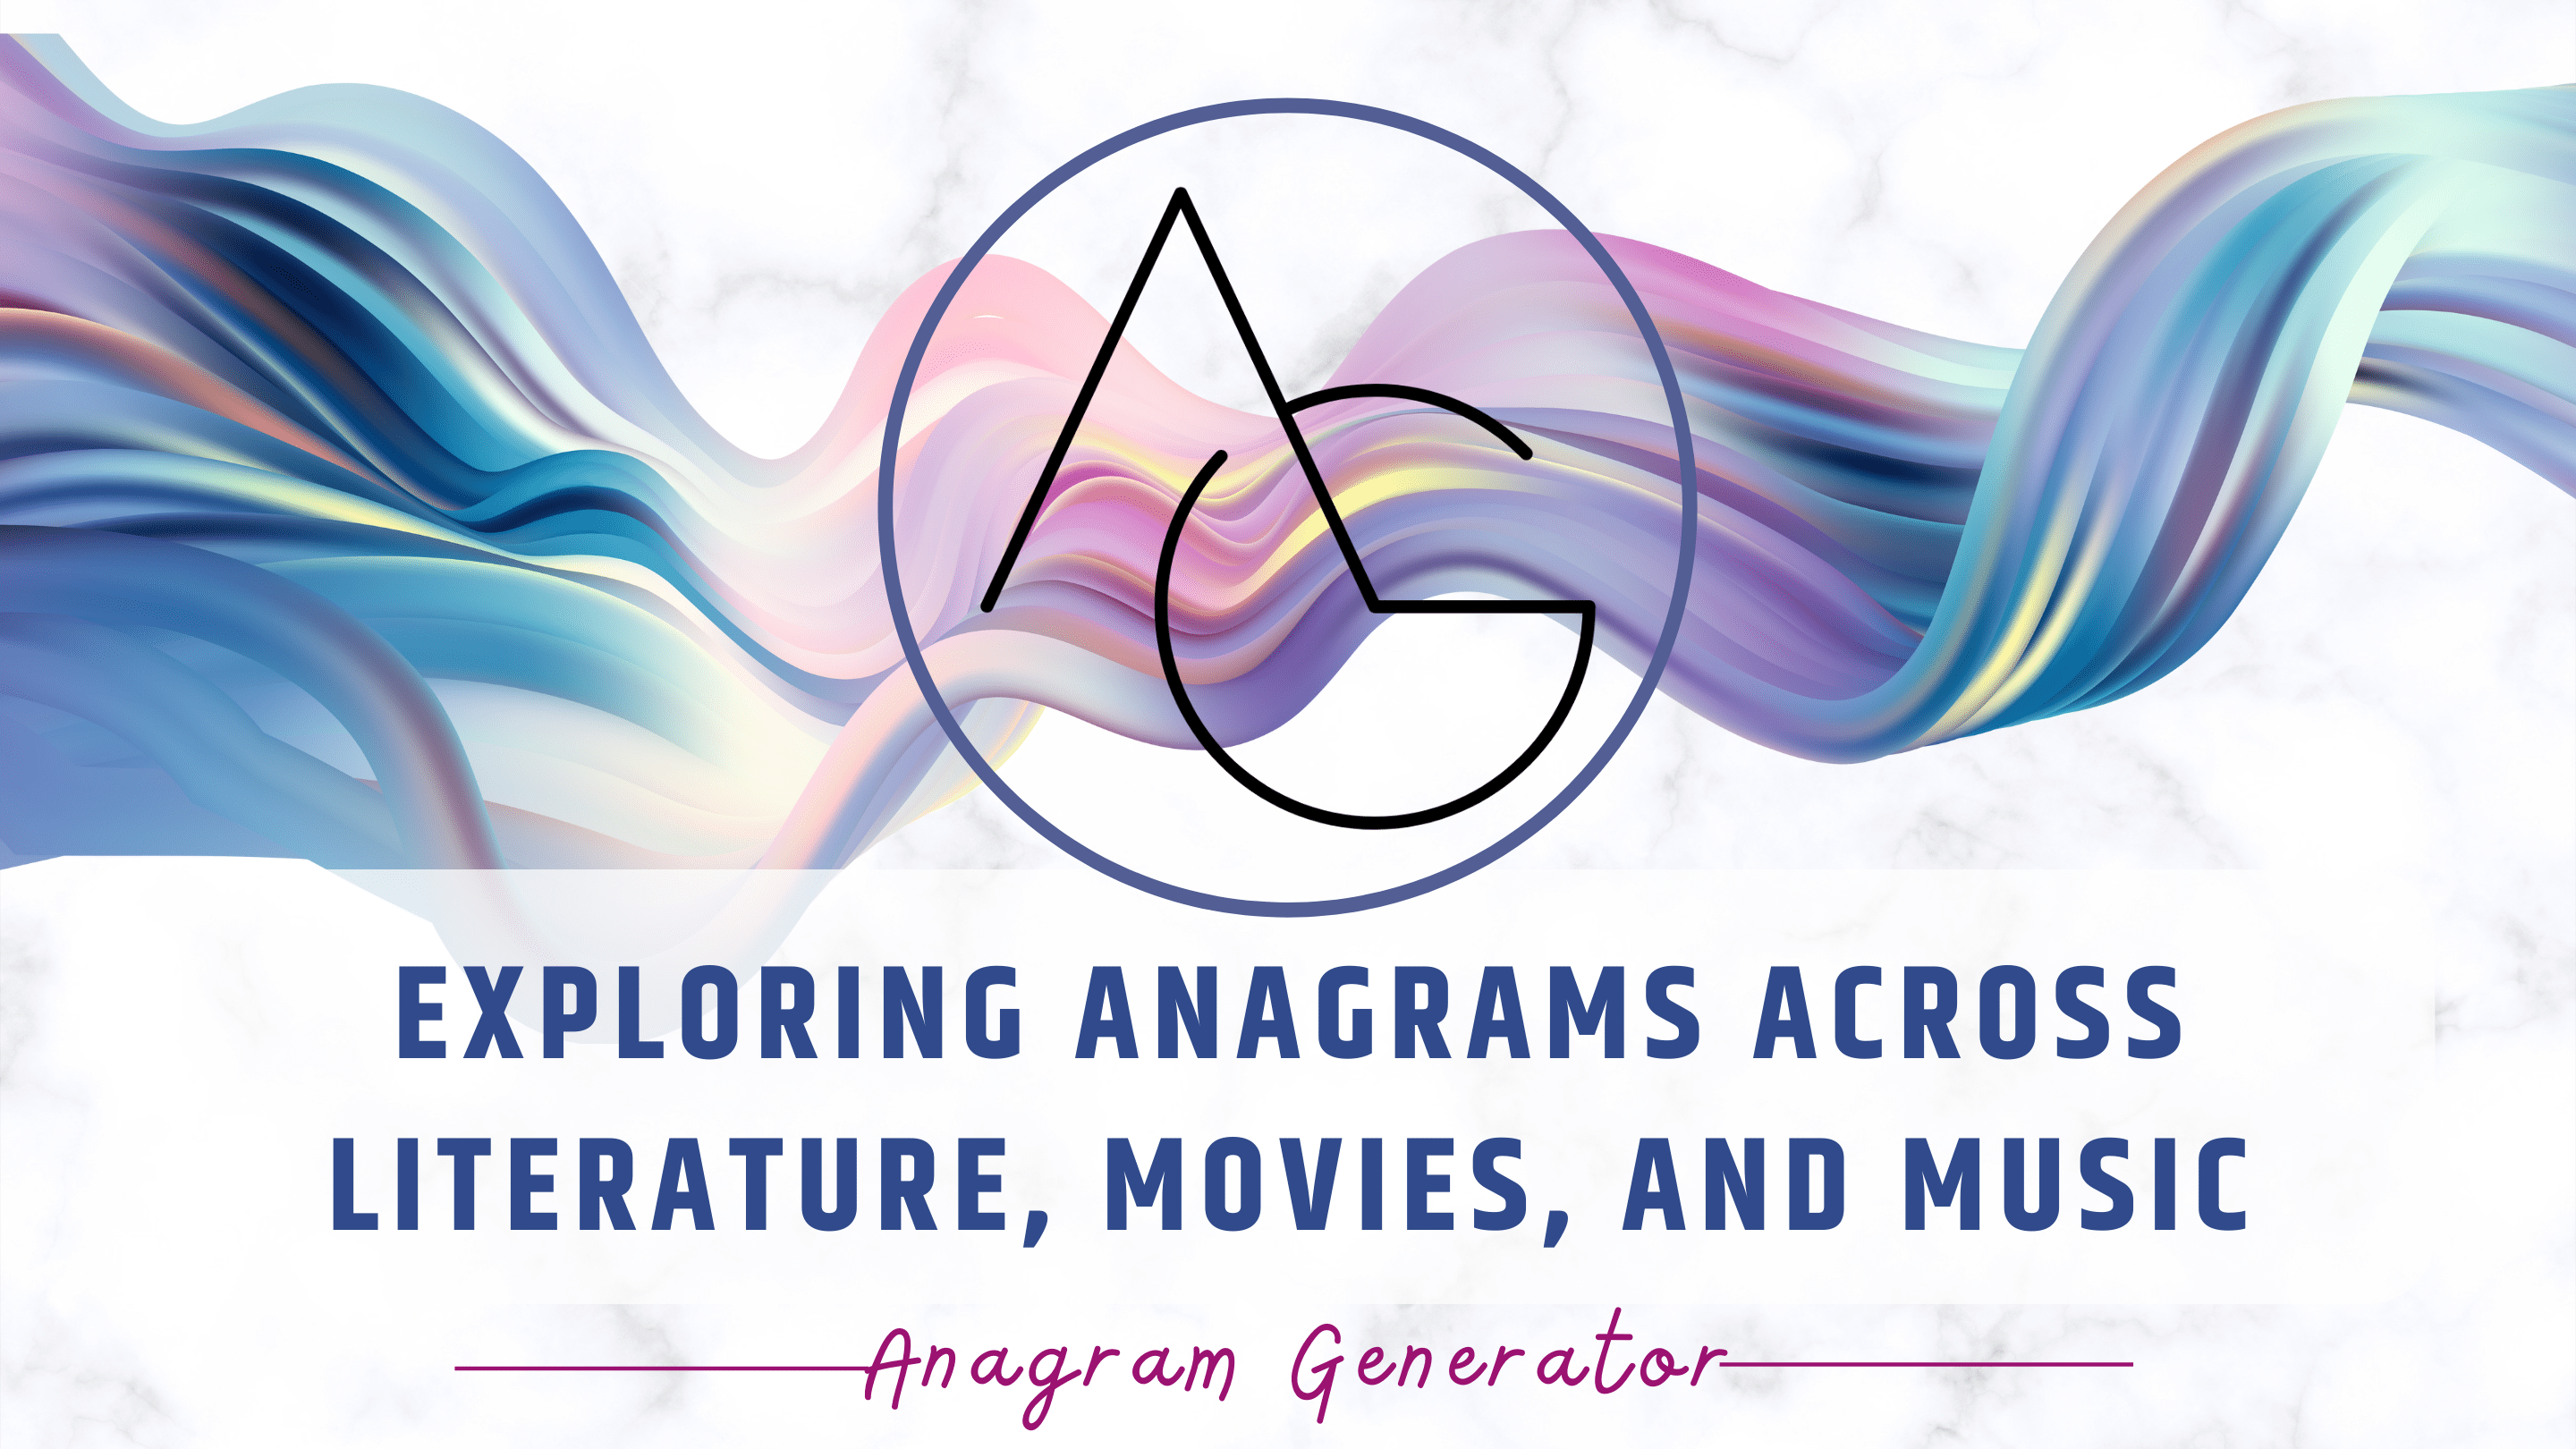 exploration of anagrams across literature, movies, and music, showcasing their creative usage and significance in various mediums